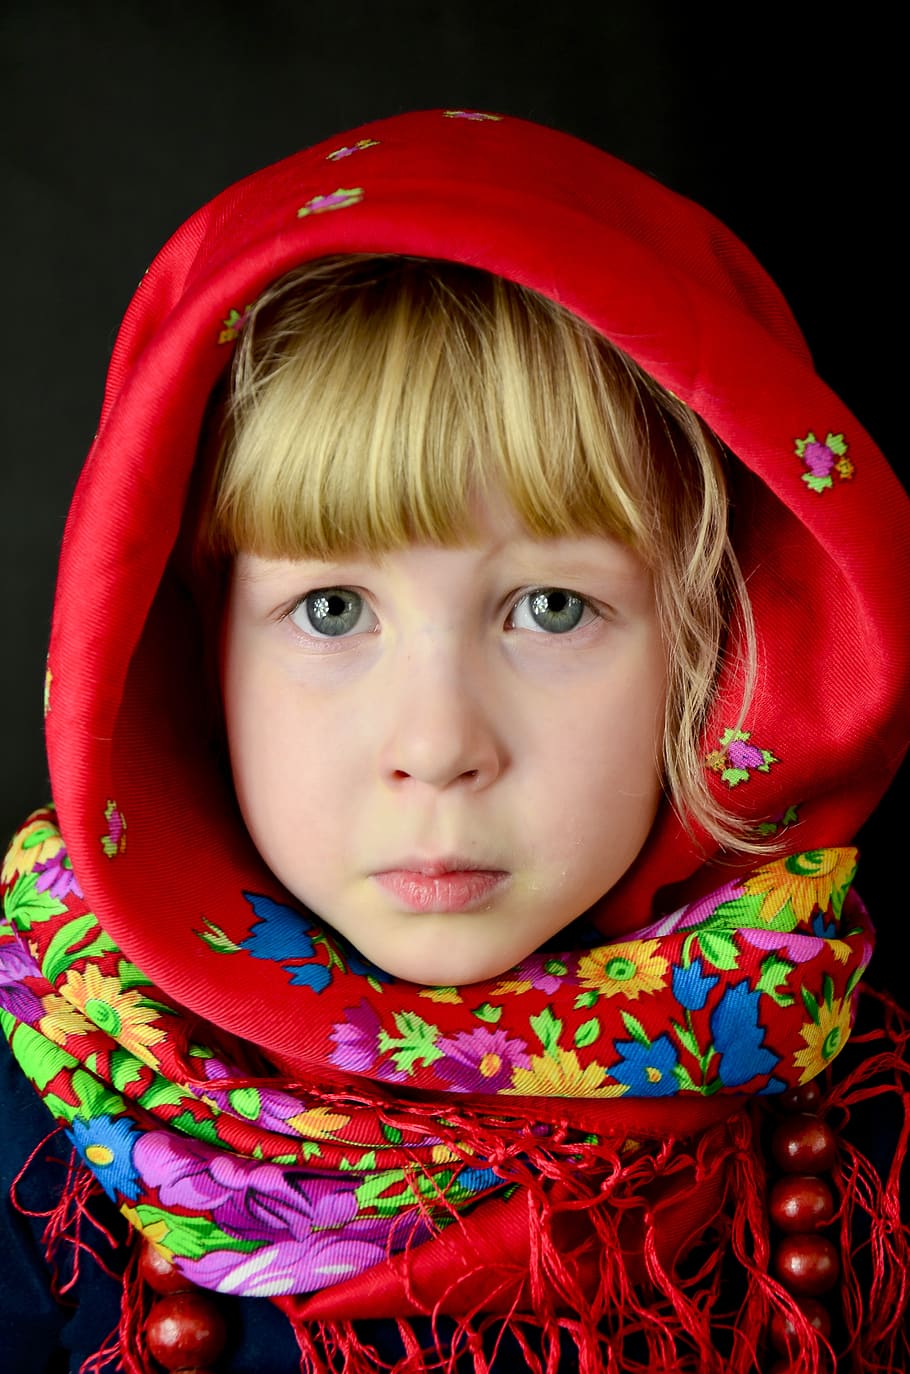 child, folklore, sadness, eyes, mood, girl, face, culture, the art of